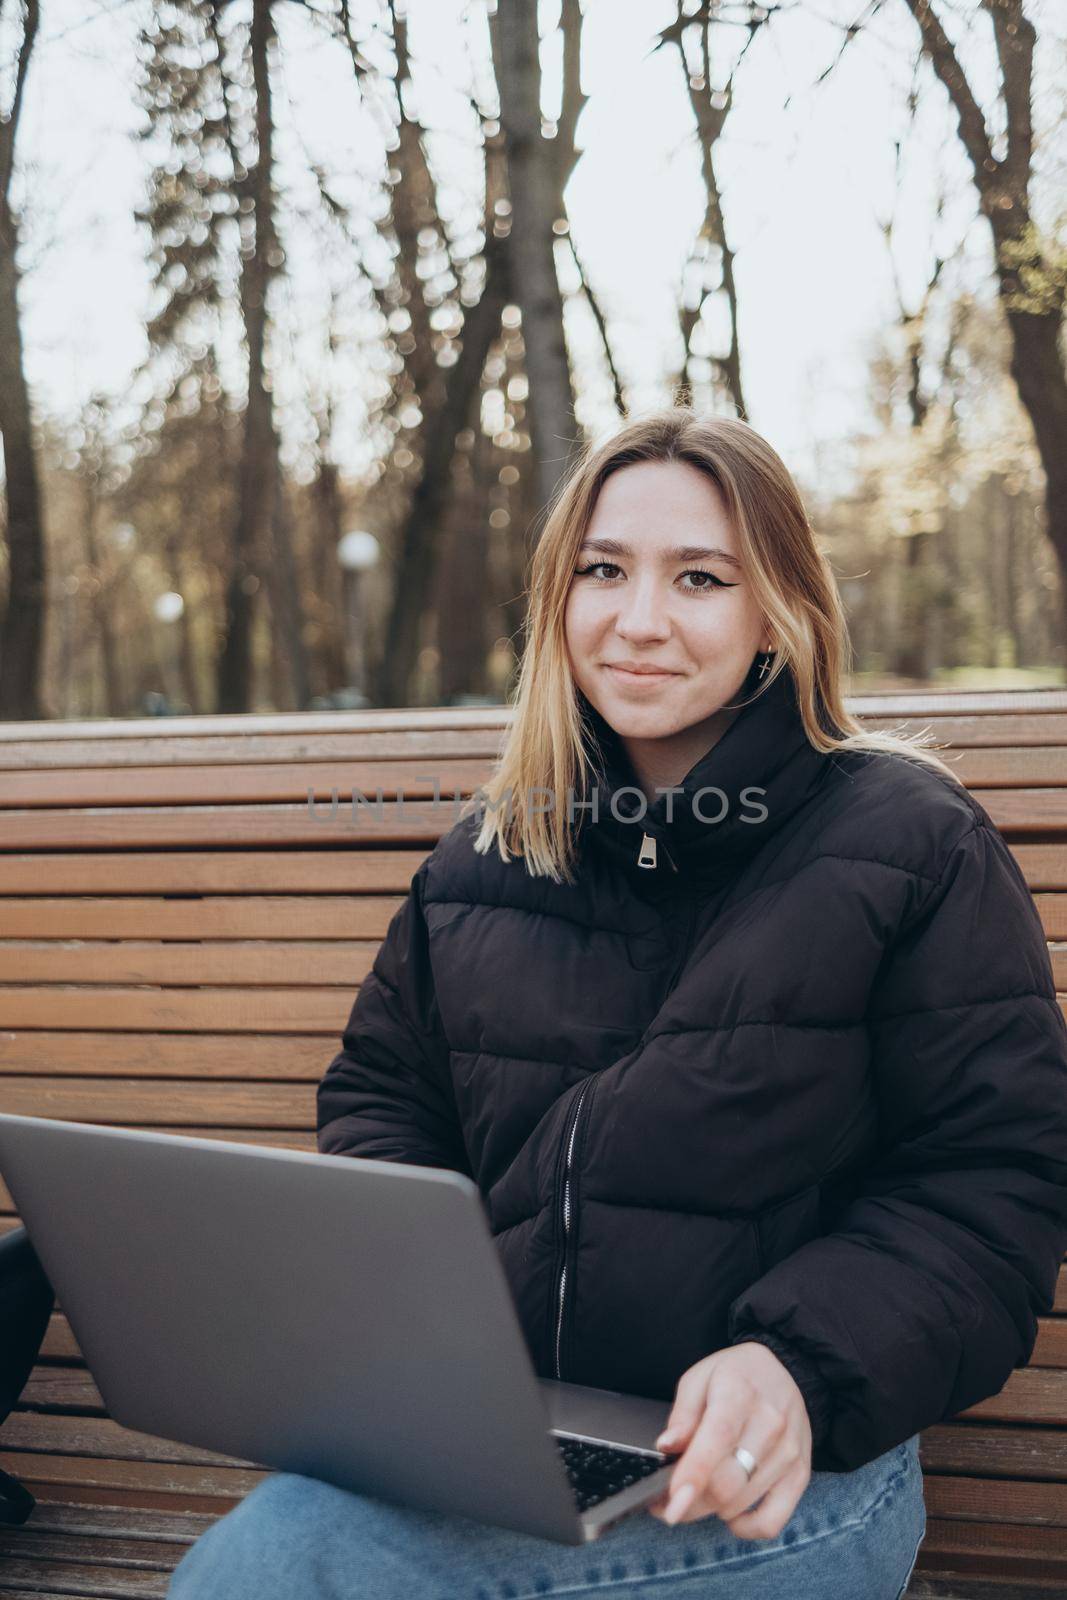 Smiling woman studying on laptop at park happy